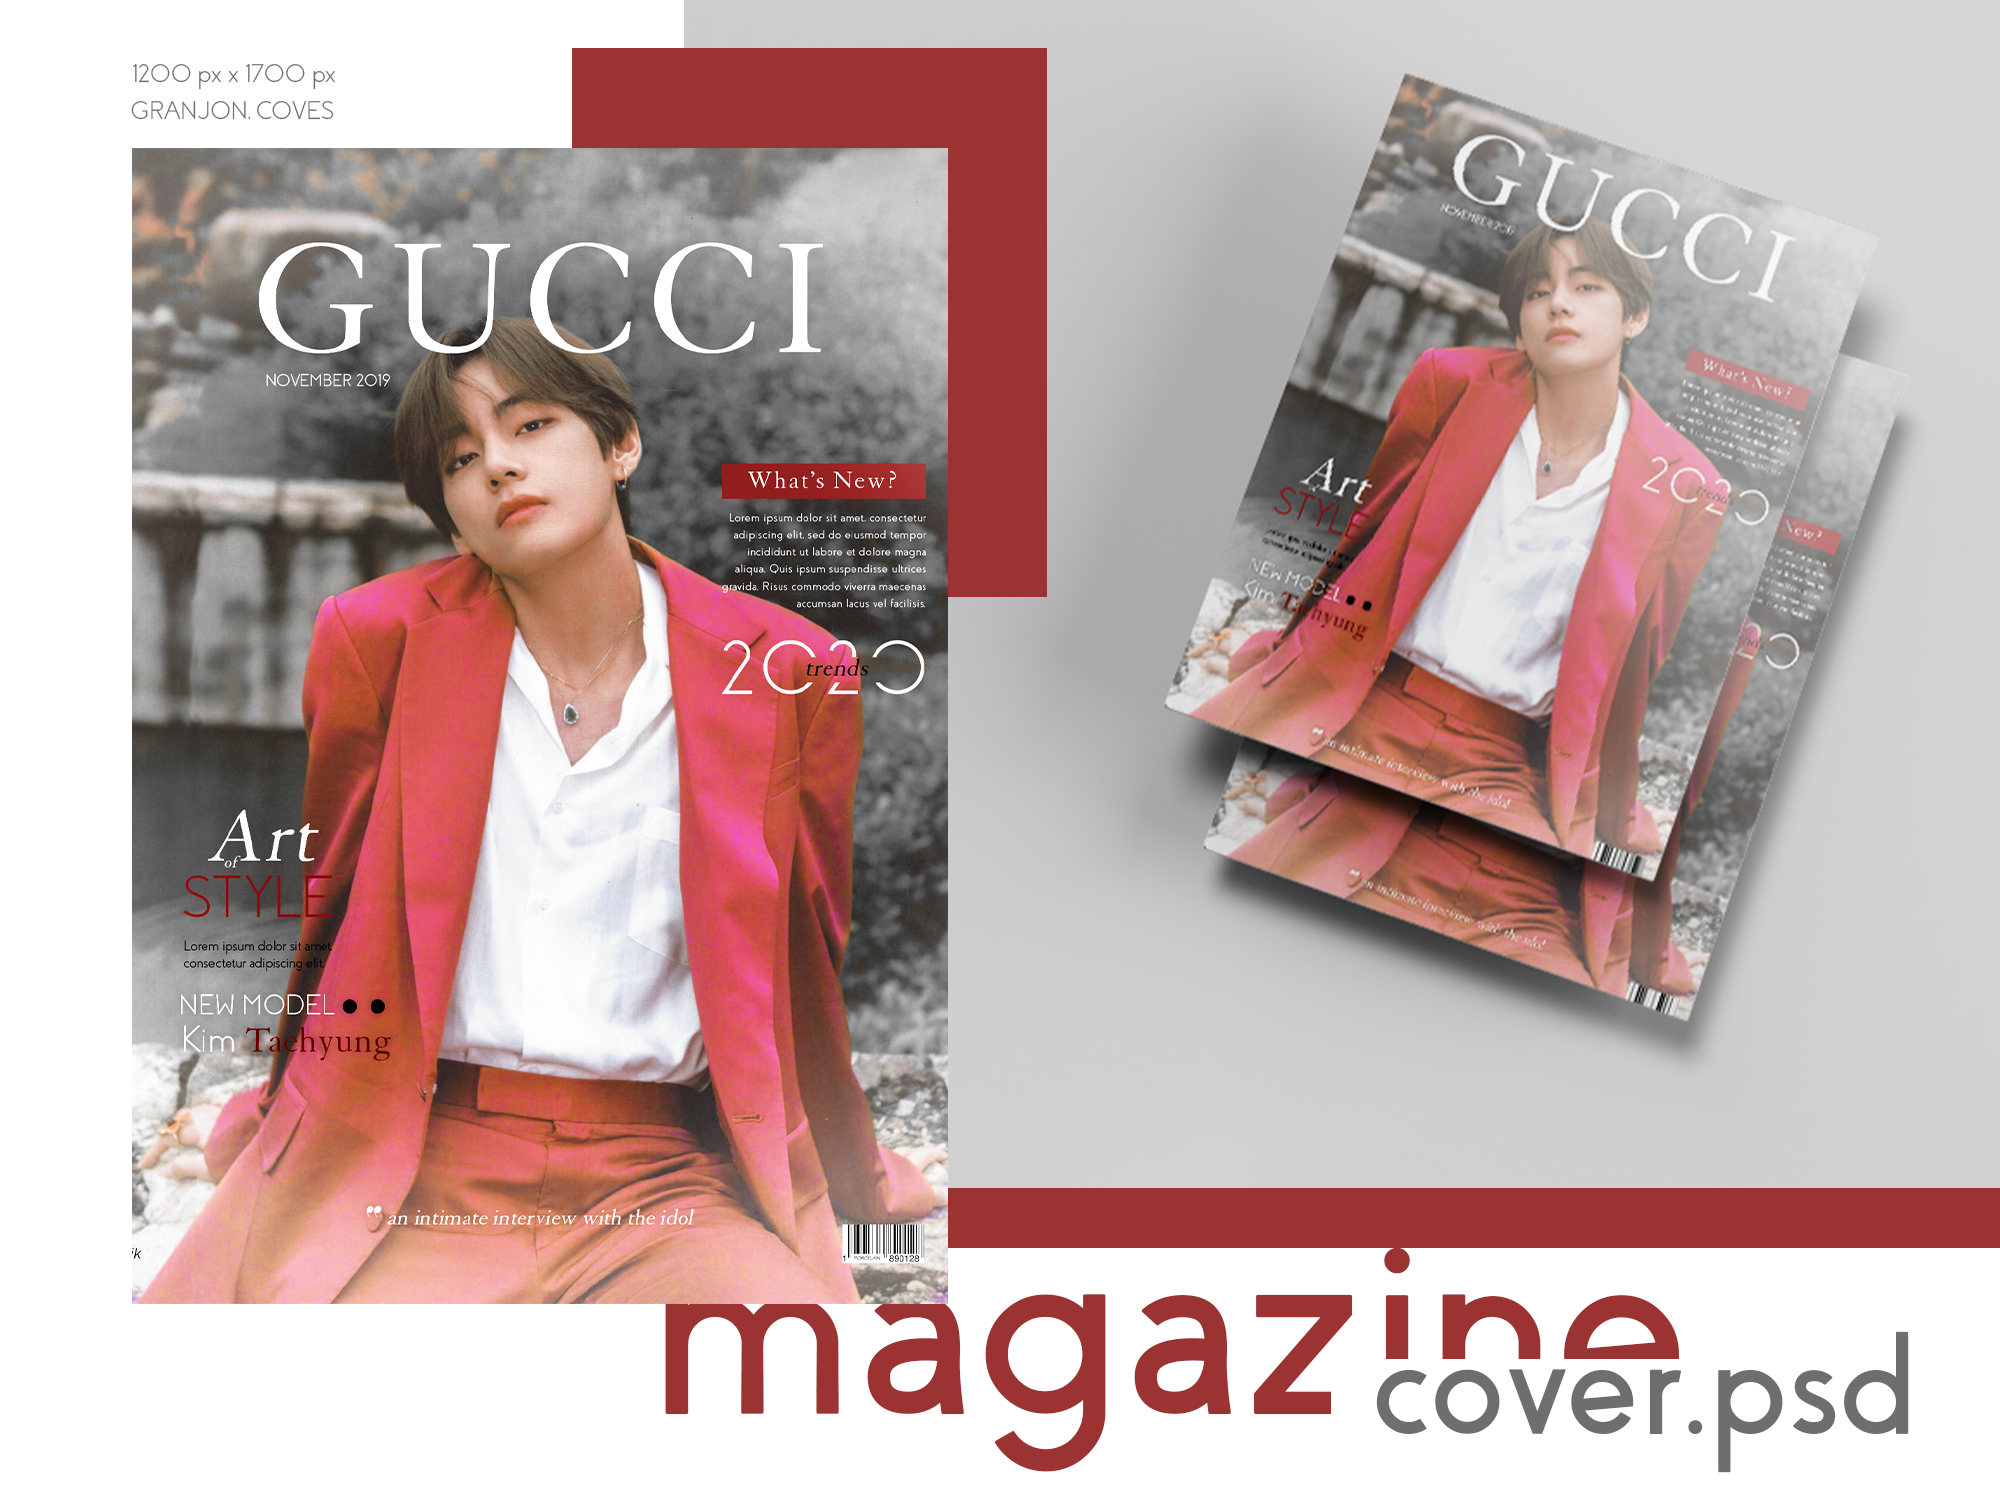 Download Magazine Cover Psd Template By Itsporcelain By Thatporcelain On Deviantart PSD Mockup Templates